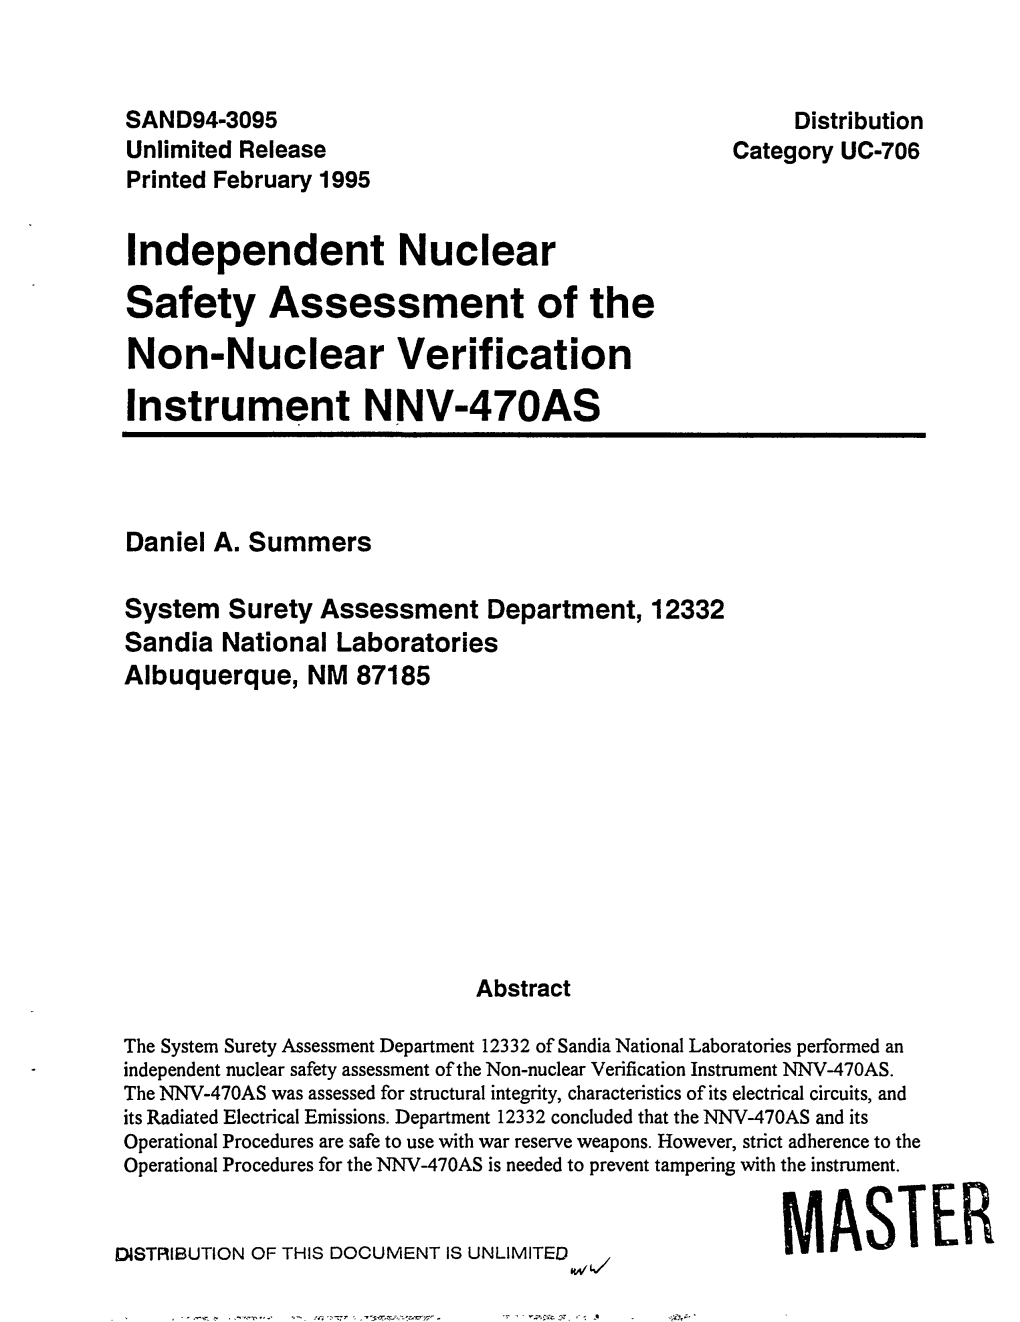 Independent Nuclear Safety Assessment of the Non-Nuclear Verification Instrument NNV-470AS